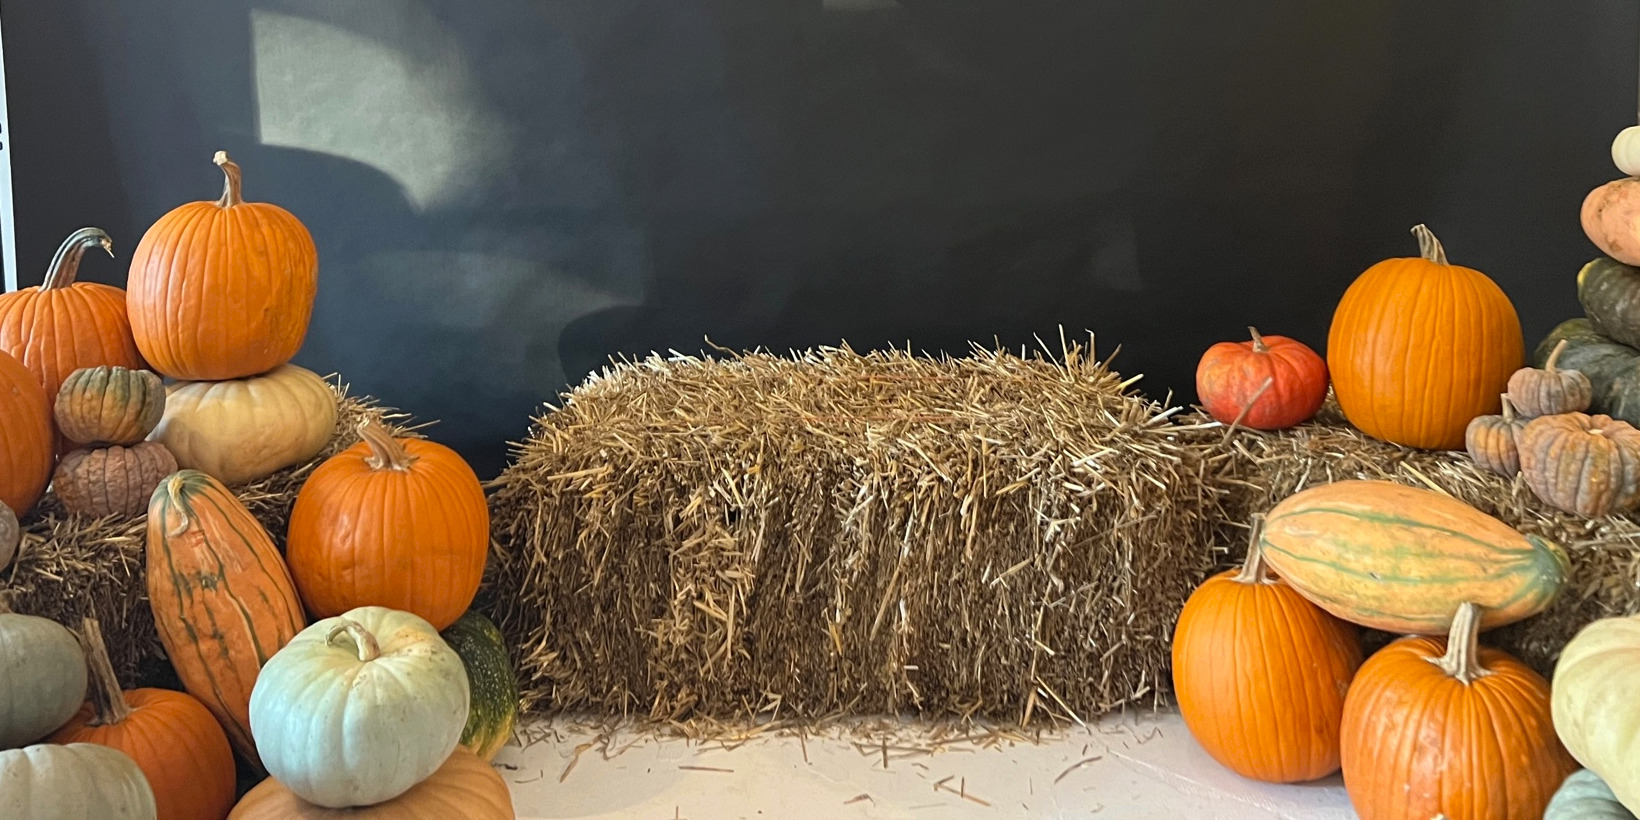 At The Land Connection's fundraiser, there is a bale of hay beside groups of pumpkins in varying sizes and colors for a Harvest Dinner.